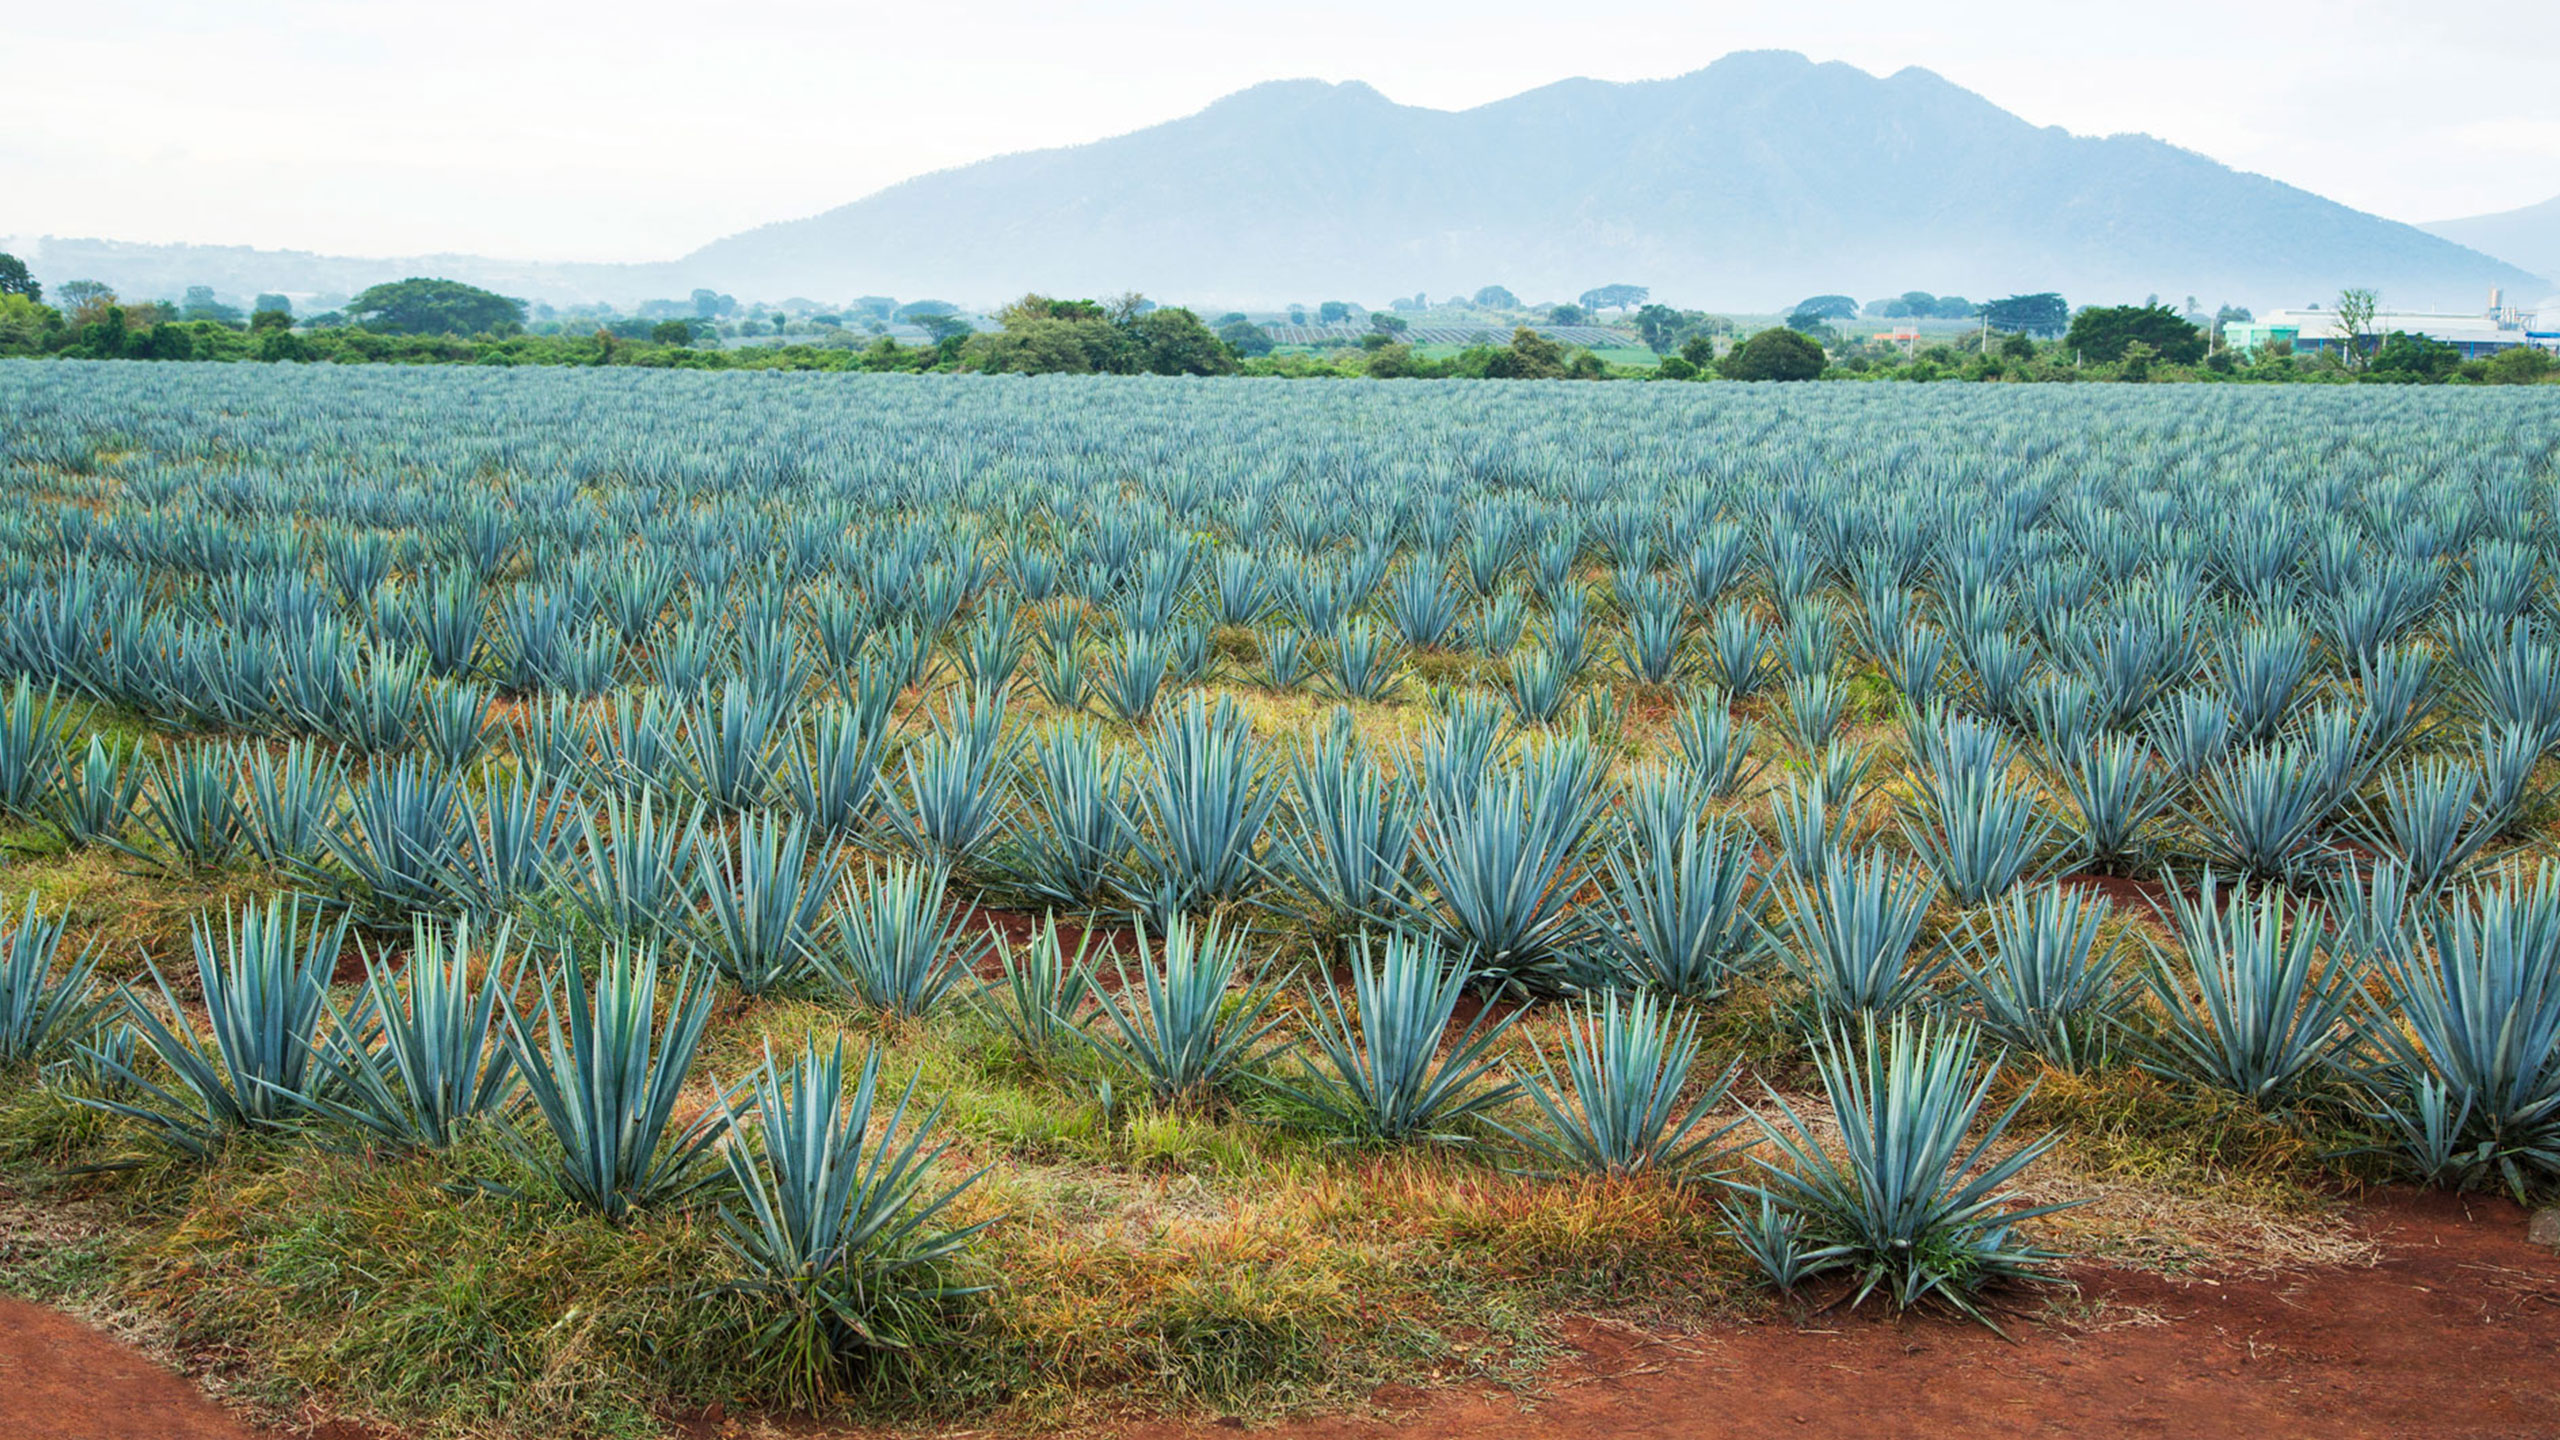 Agave-policia-tequila